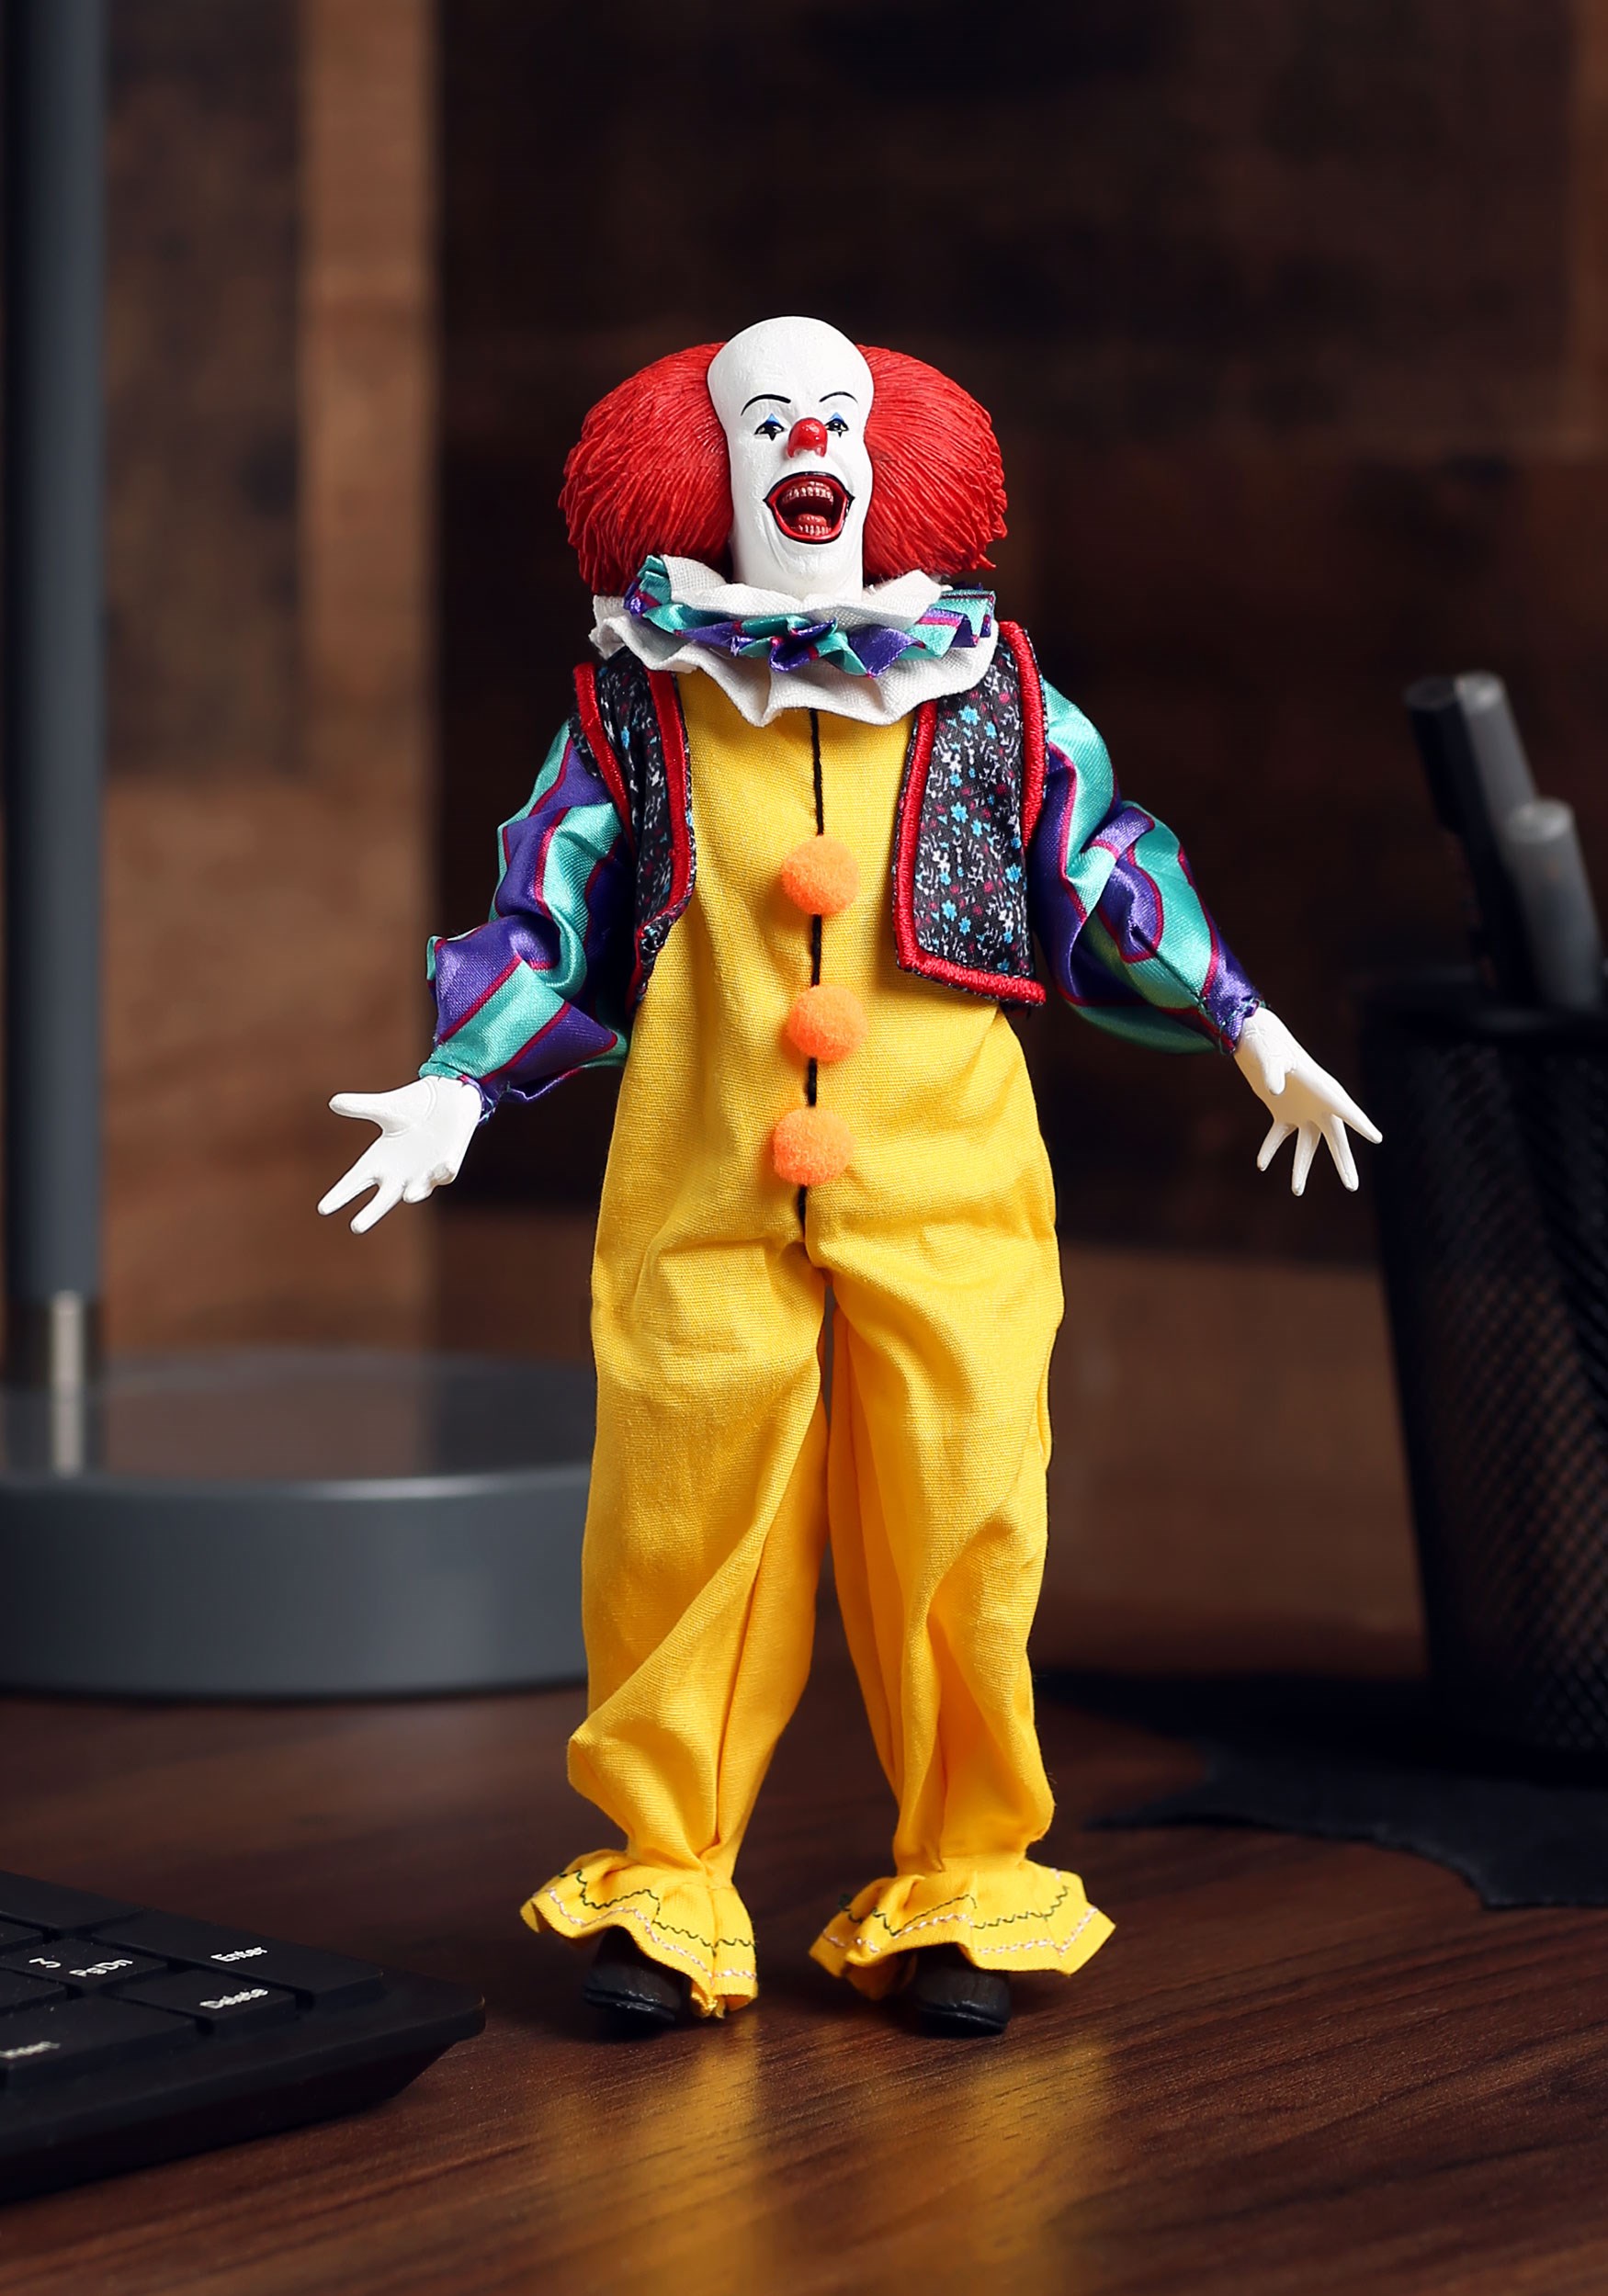 pennywise figure 1990